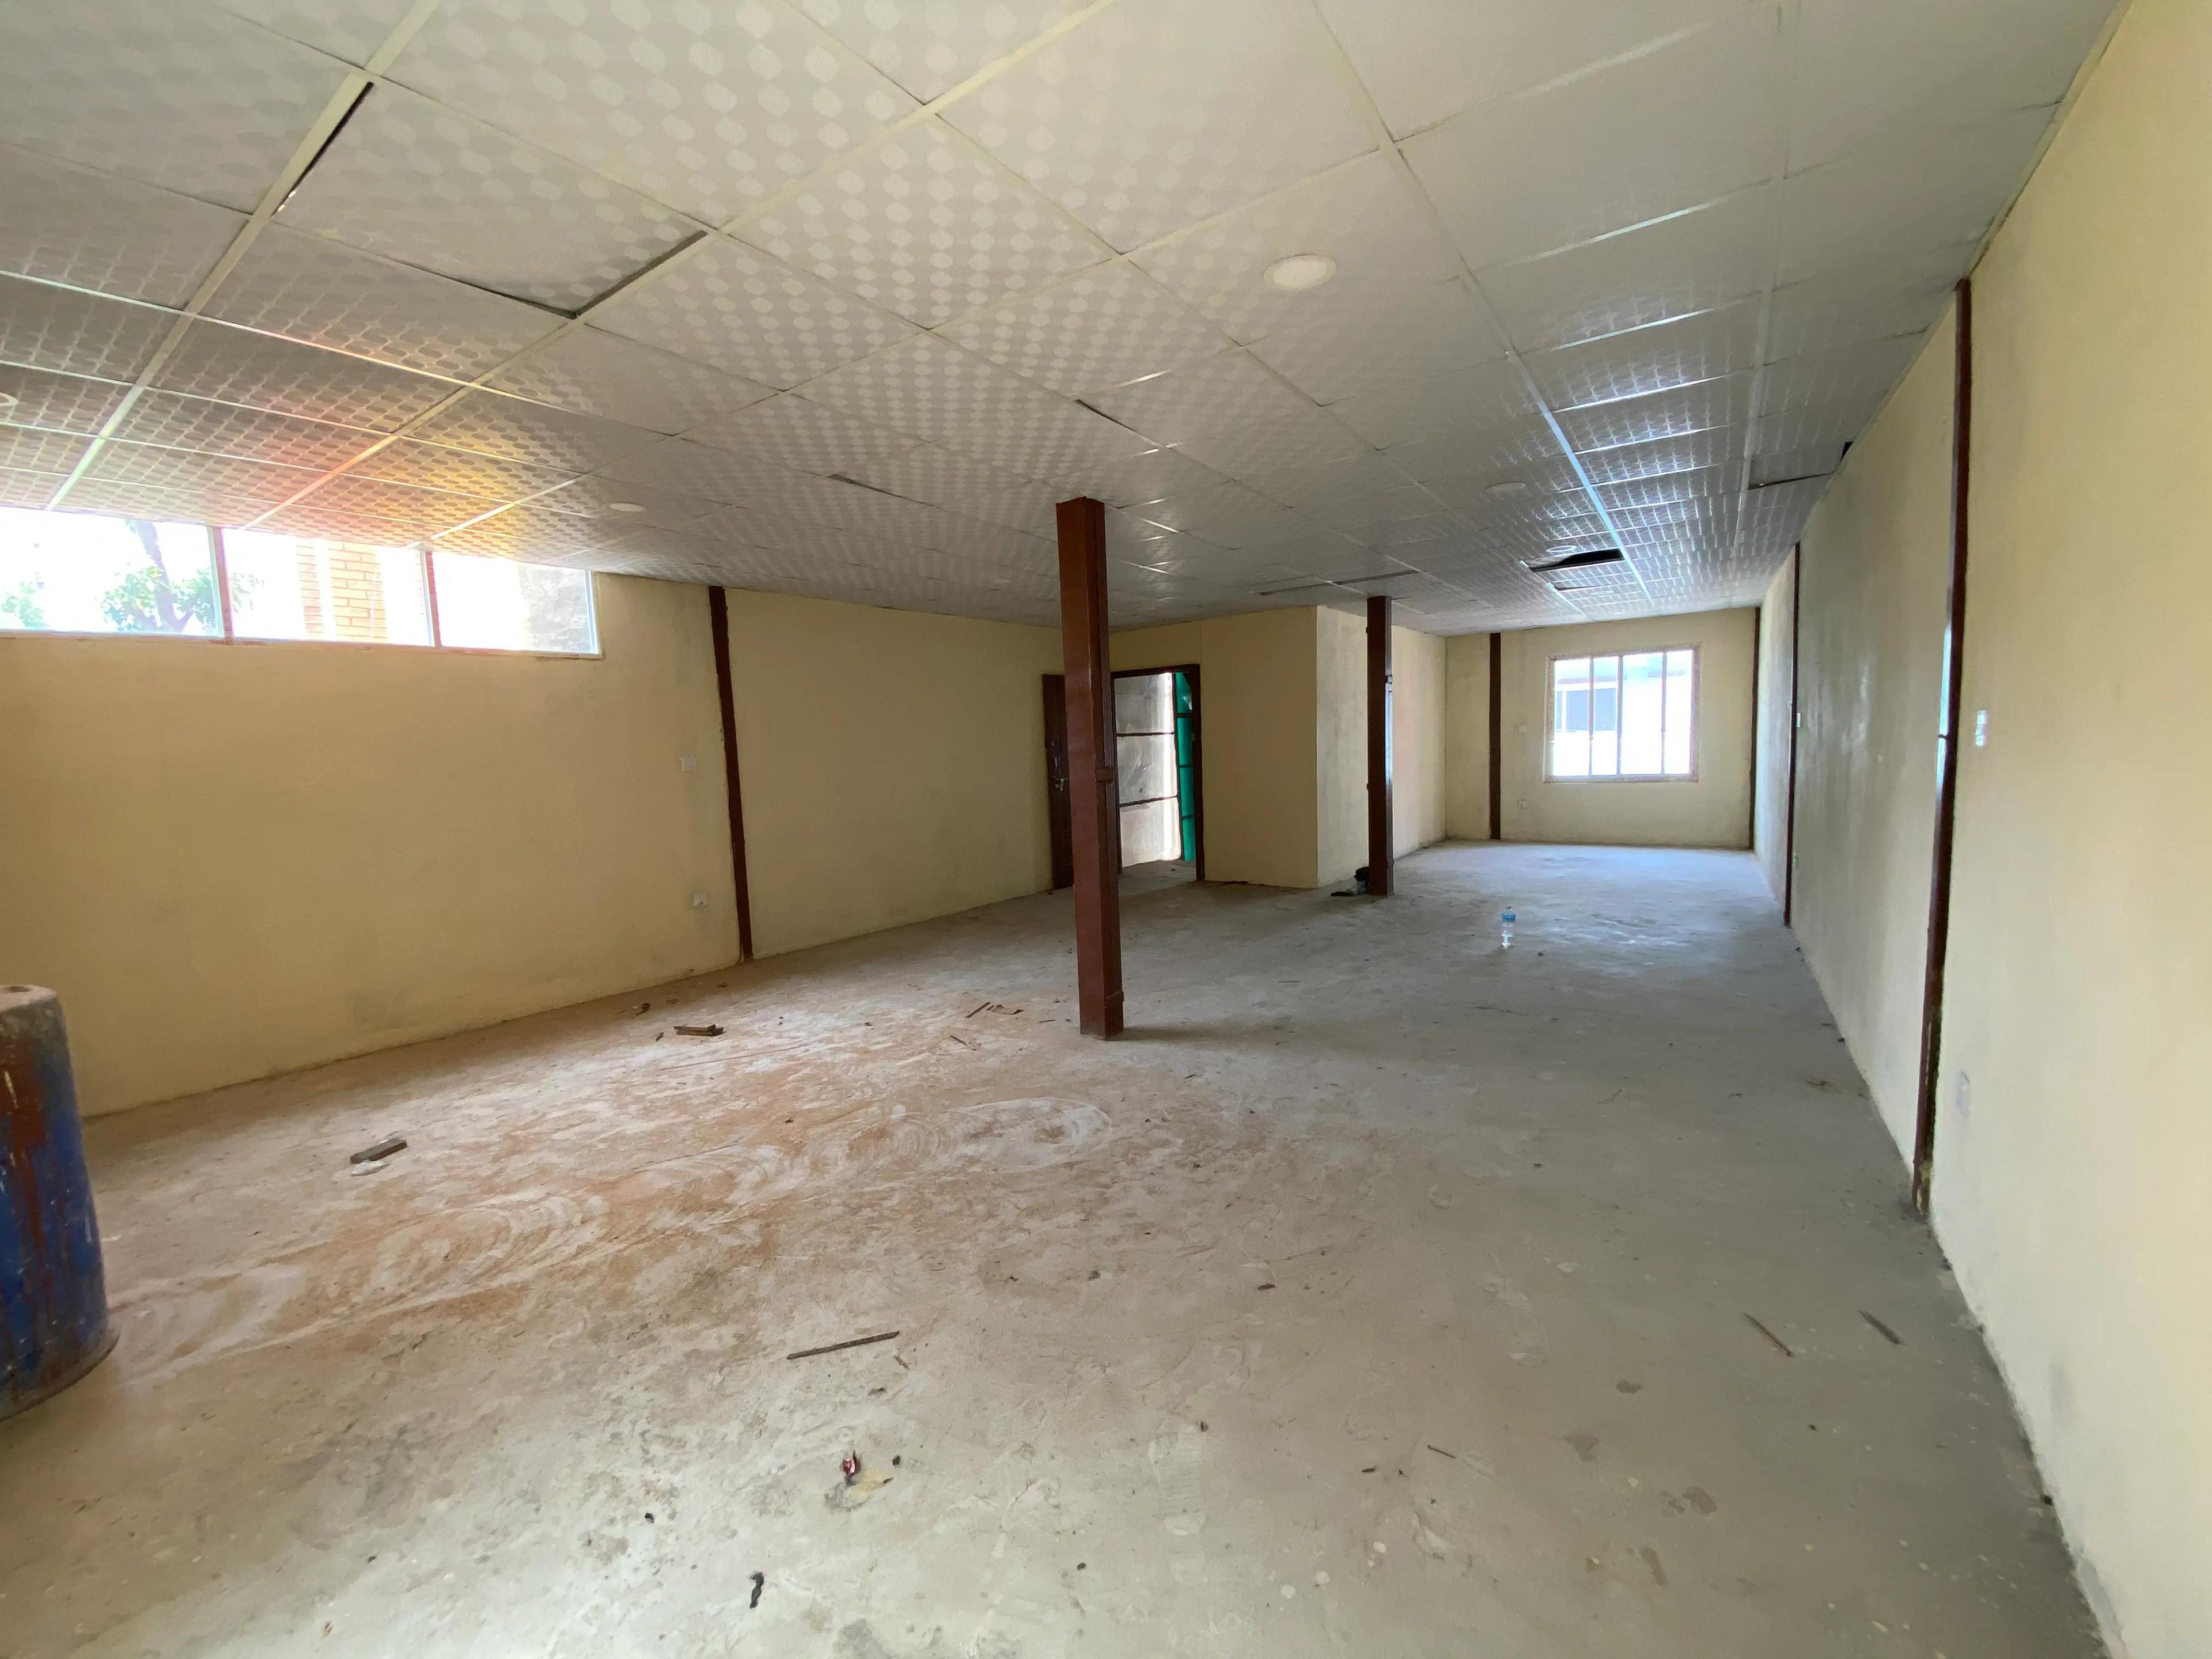  Commercial House for Sale in Kapan-image-2